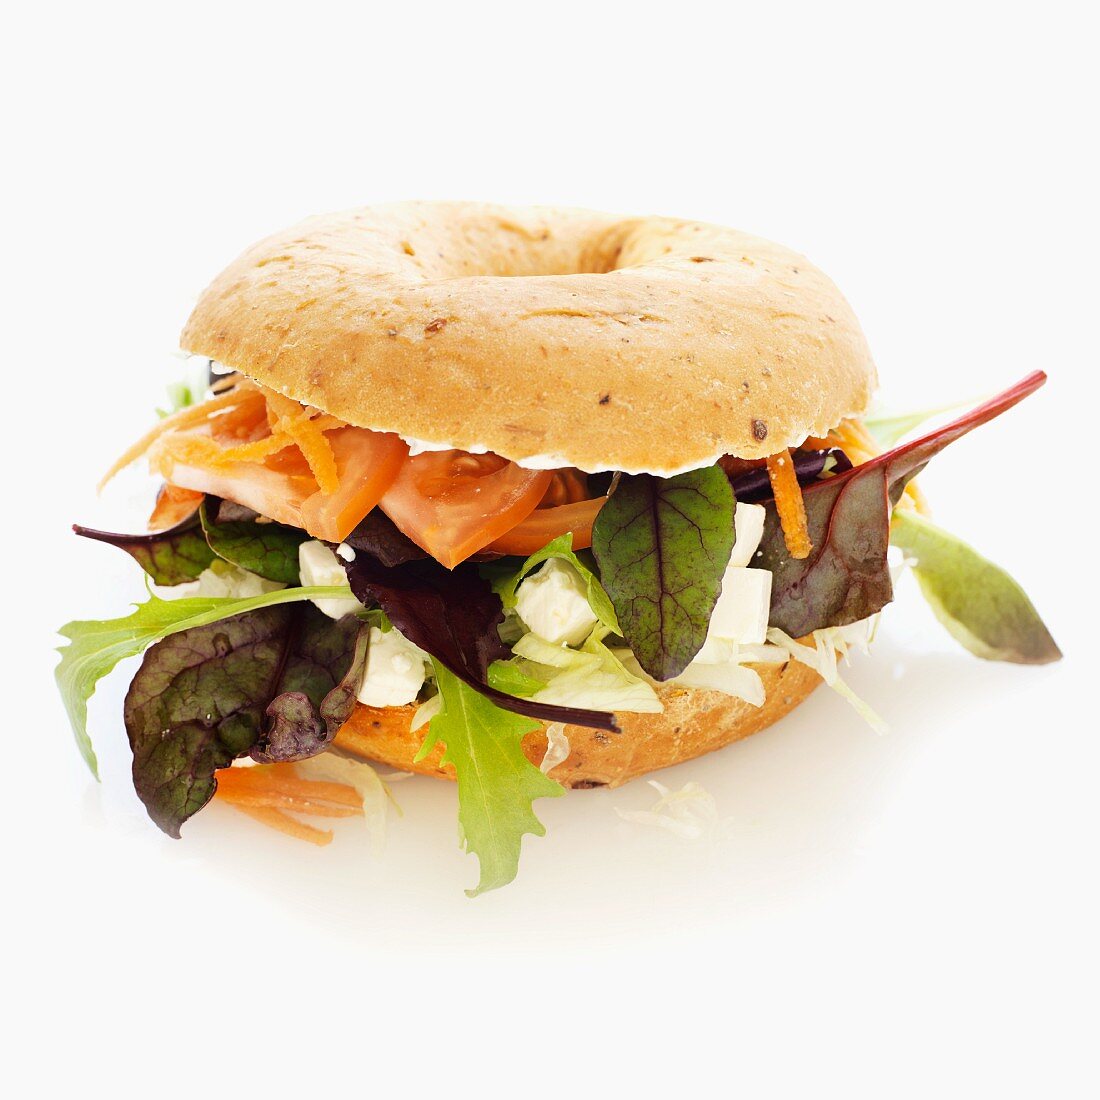 A bagel with feta cheese, lettuce, tomato and carrot